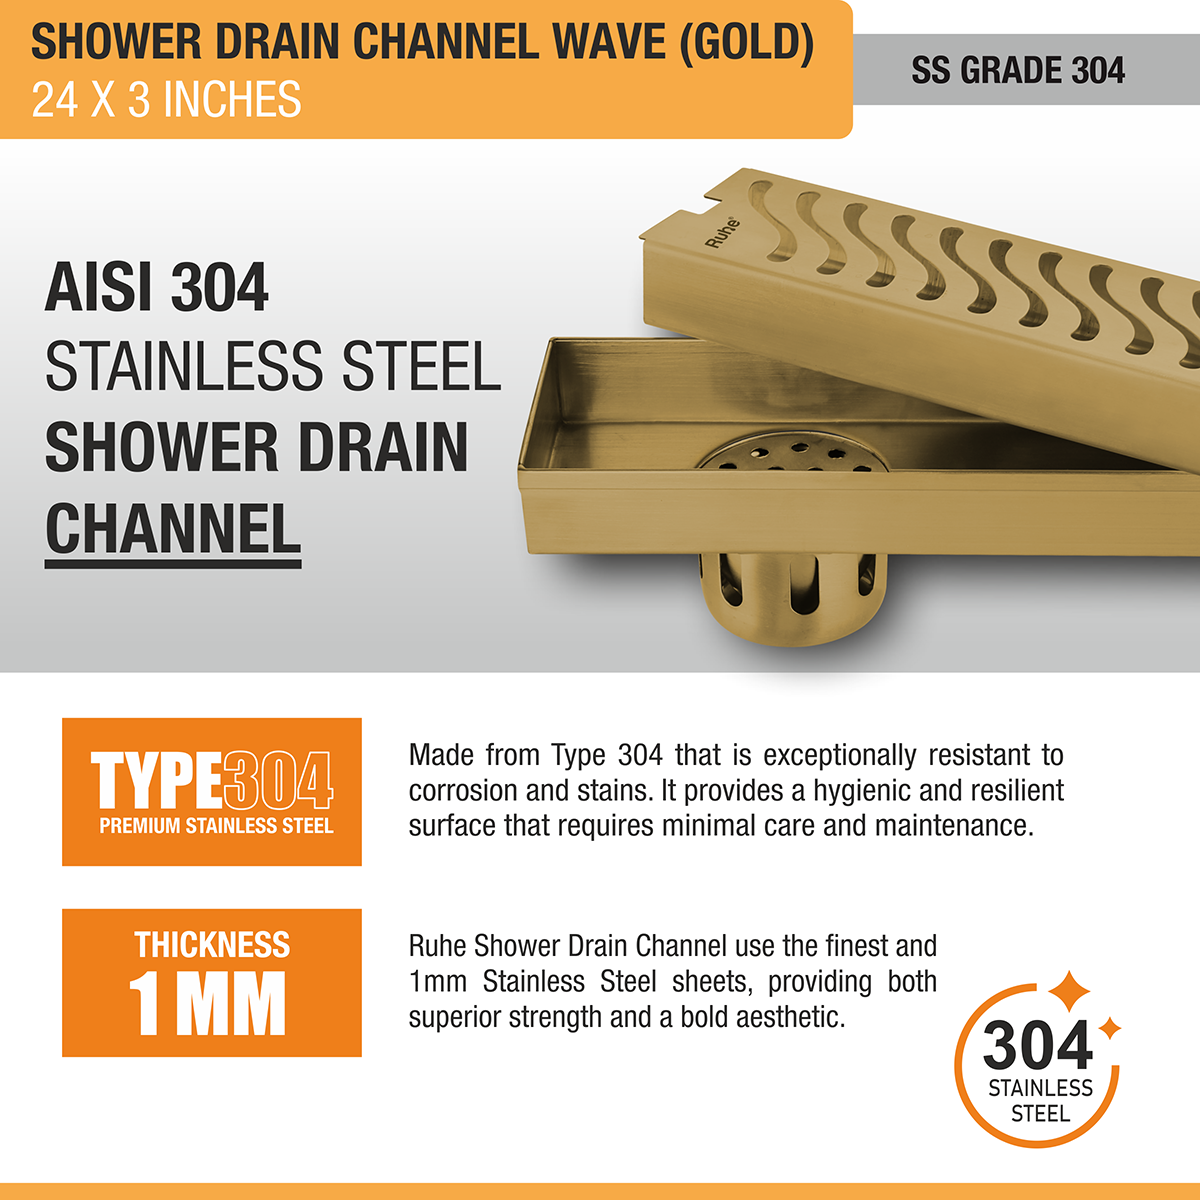 Wave Shower Drain Channel (24 x 3 Inches) YELLOW GOLD stainless steel